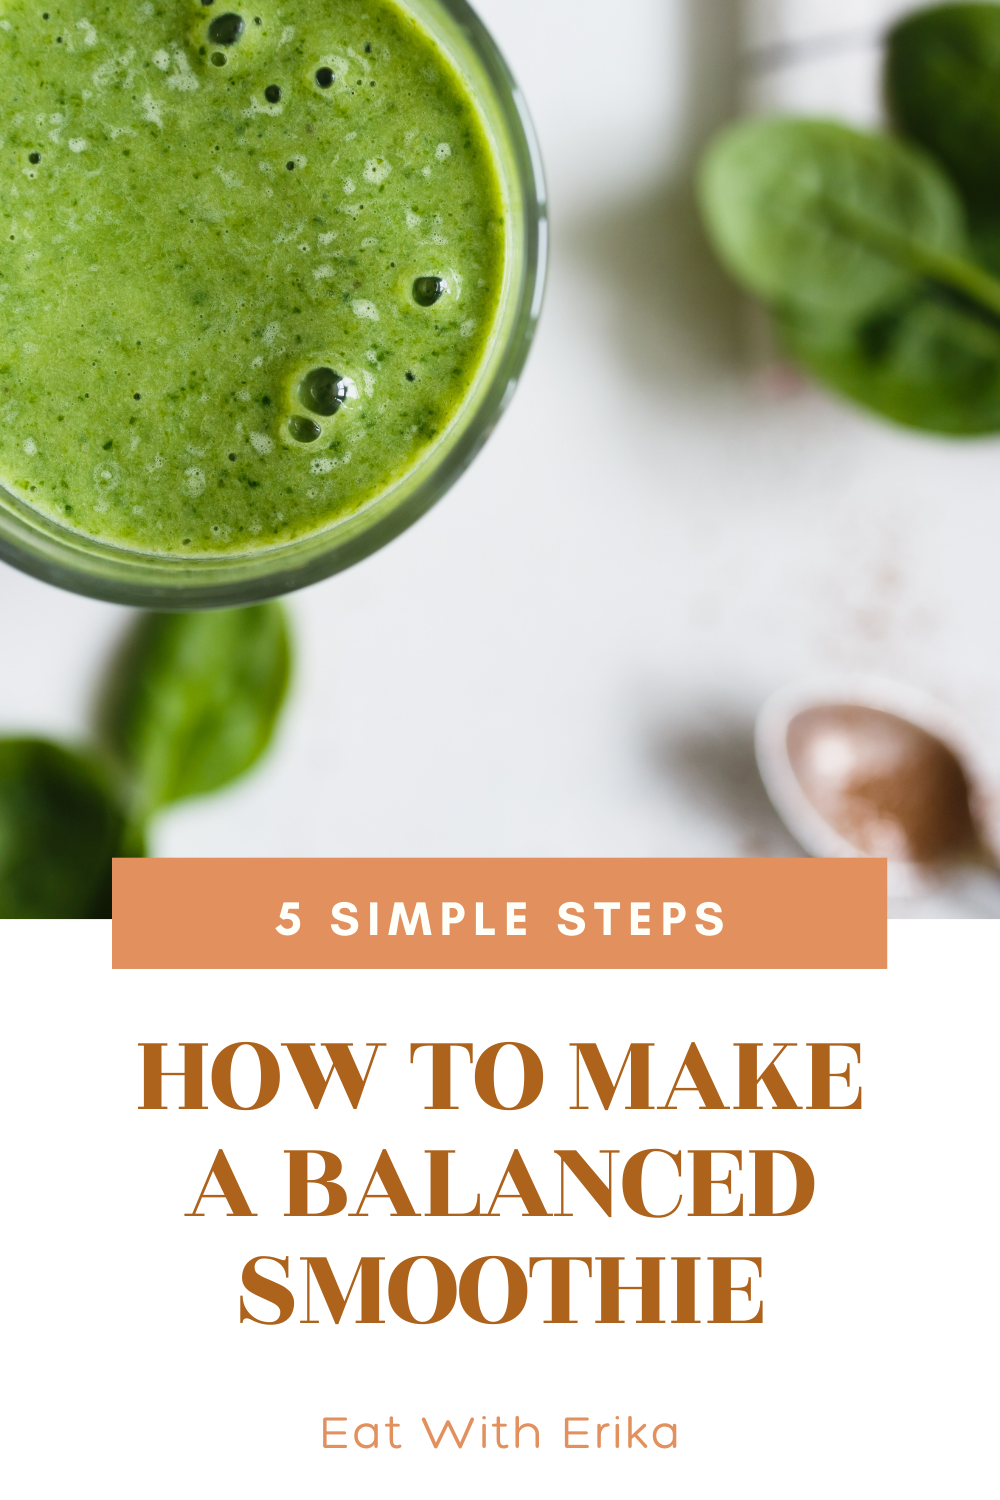 green smoothie with spinach, how to make a balanced smoothie